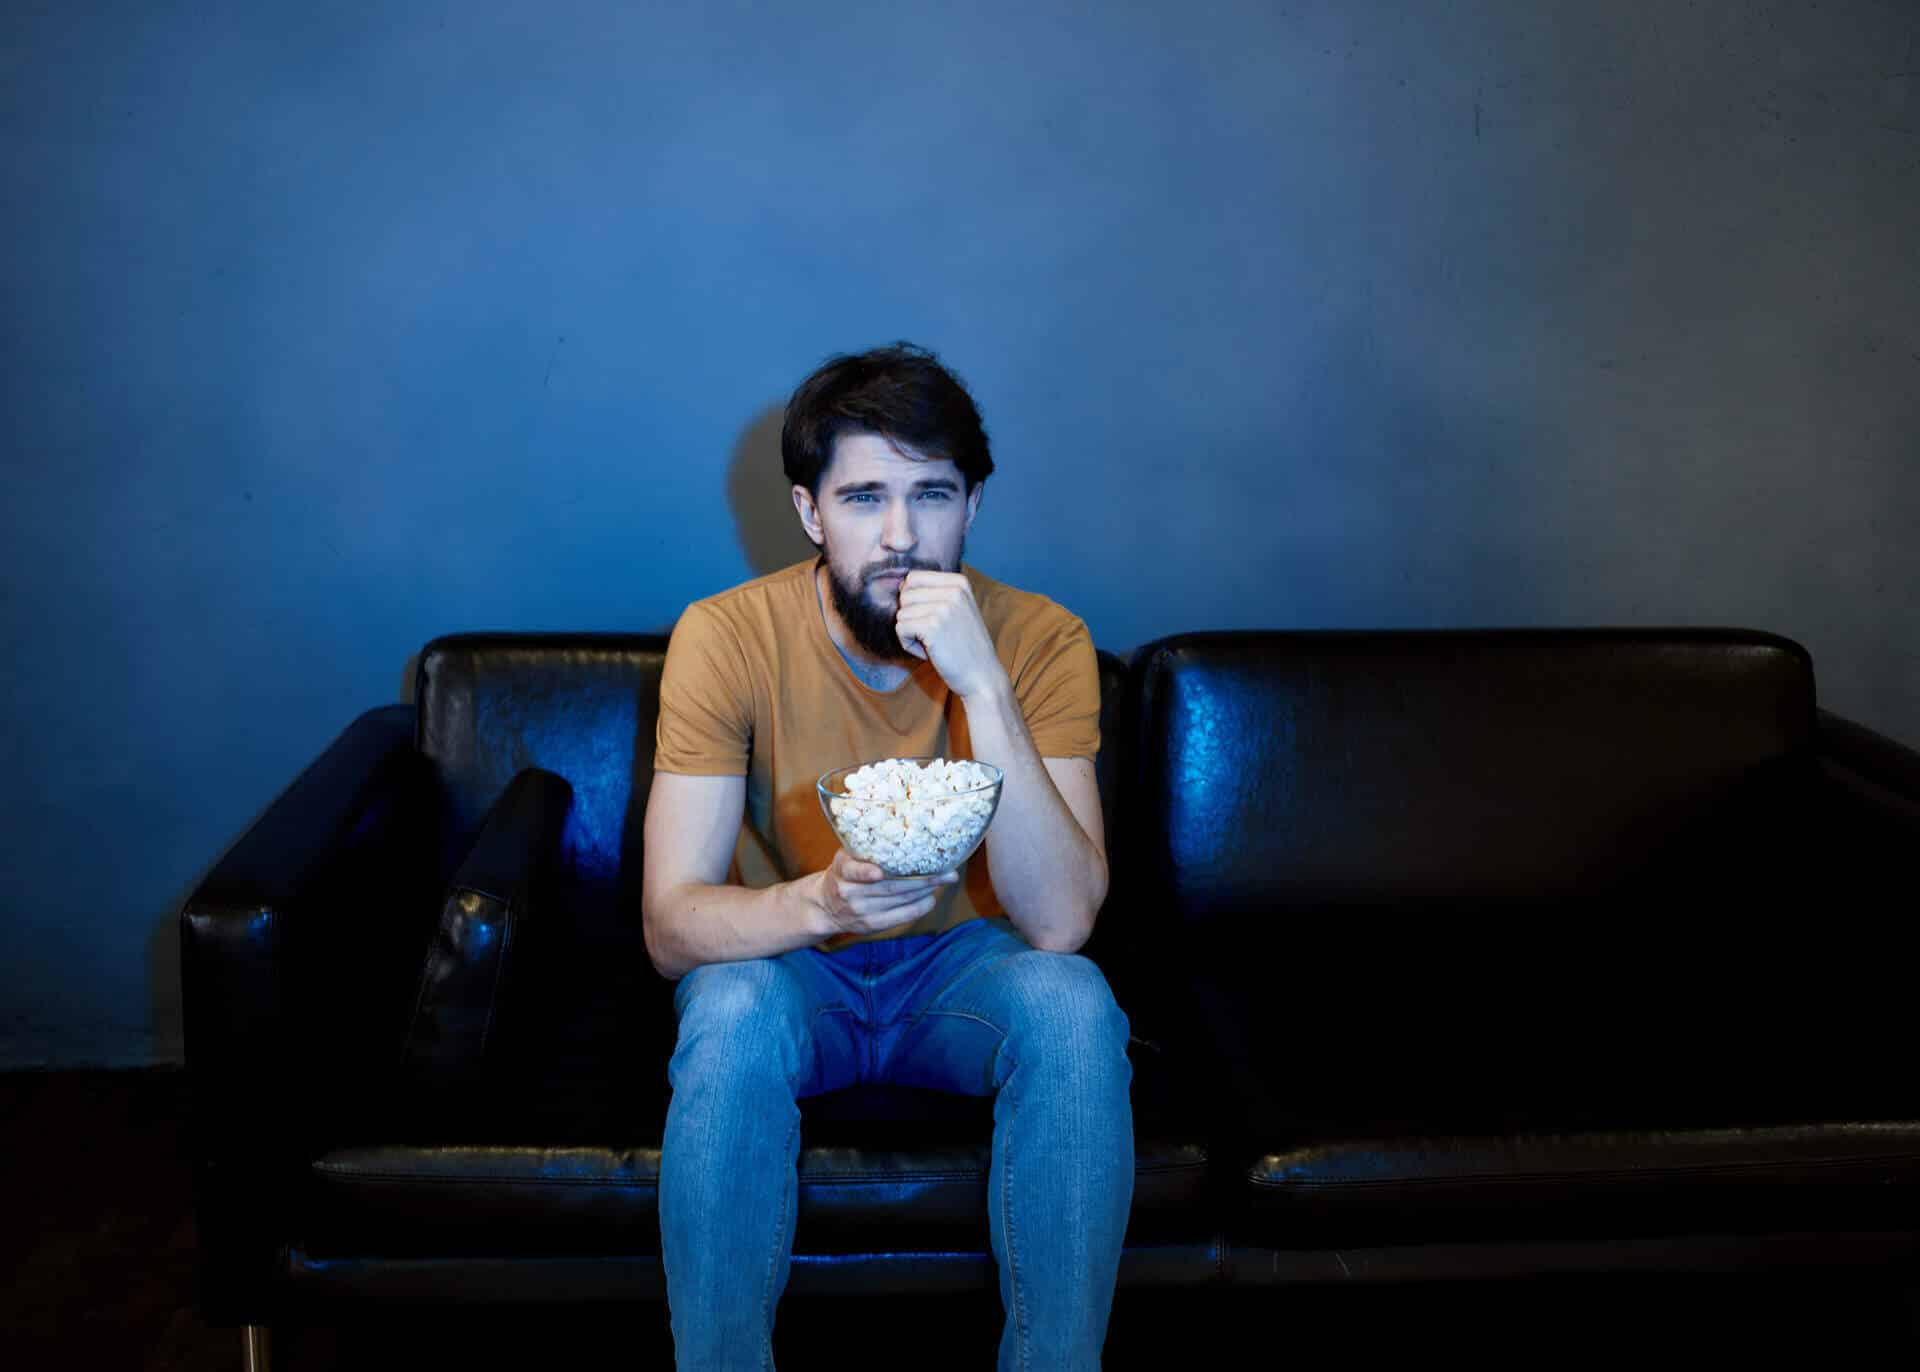 lonely man sitting on couch with popcorn